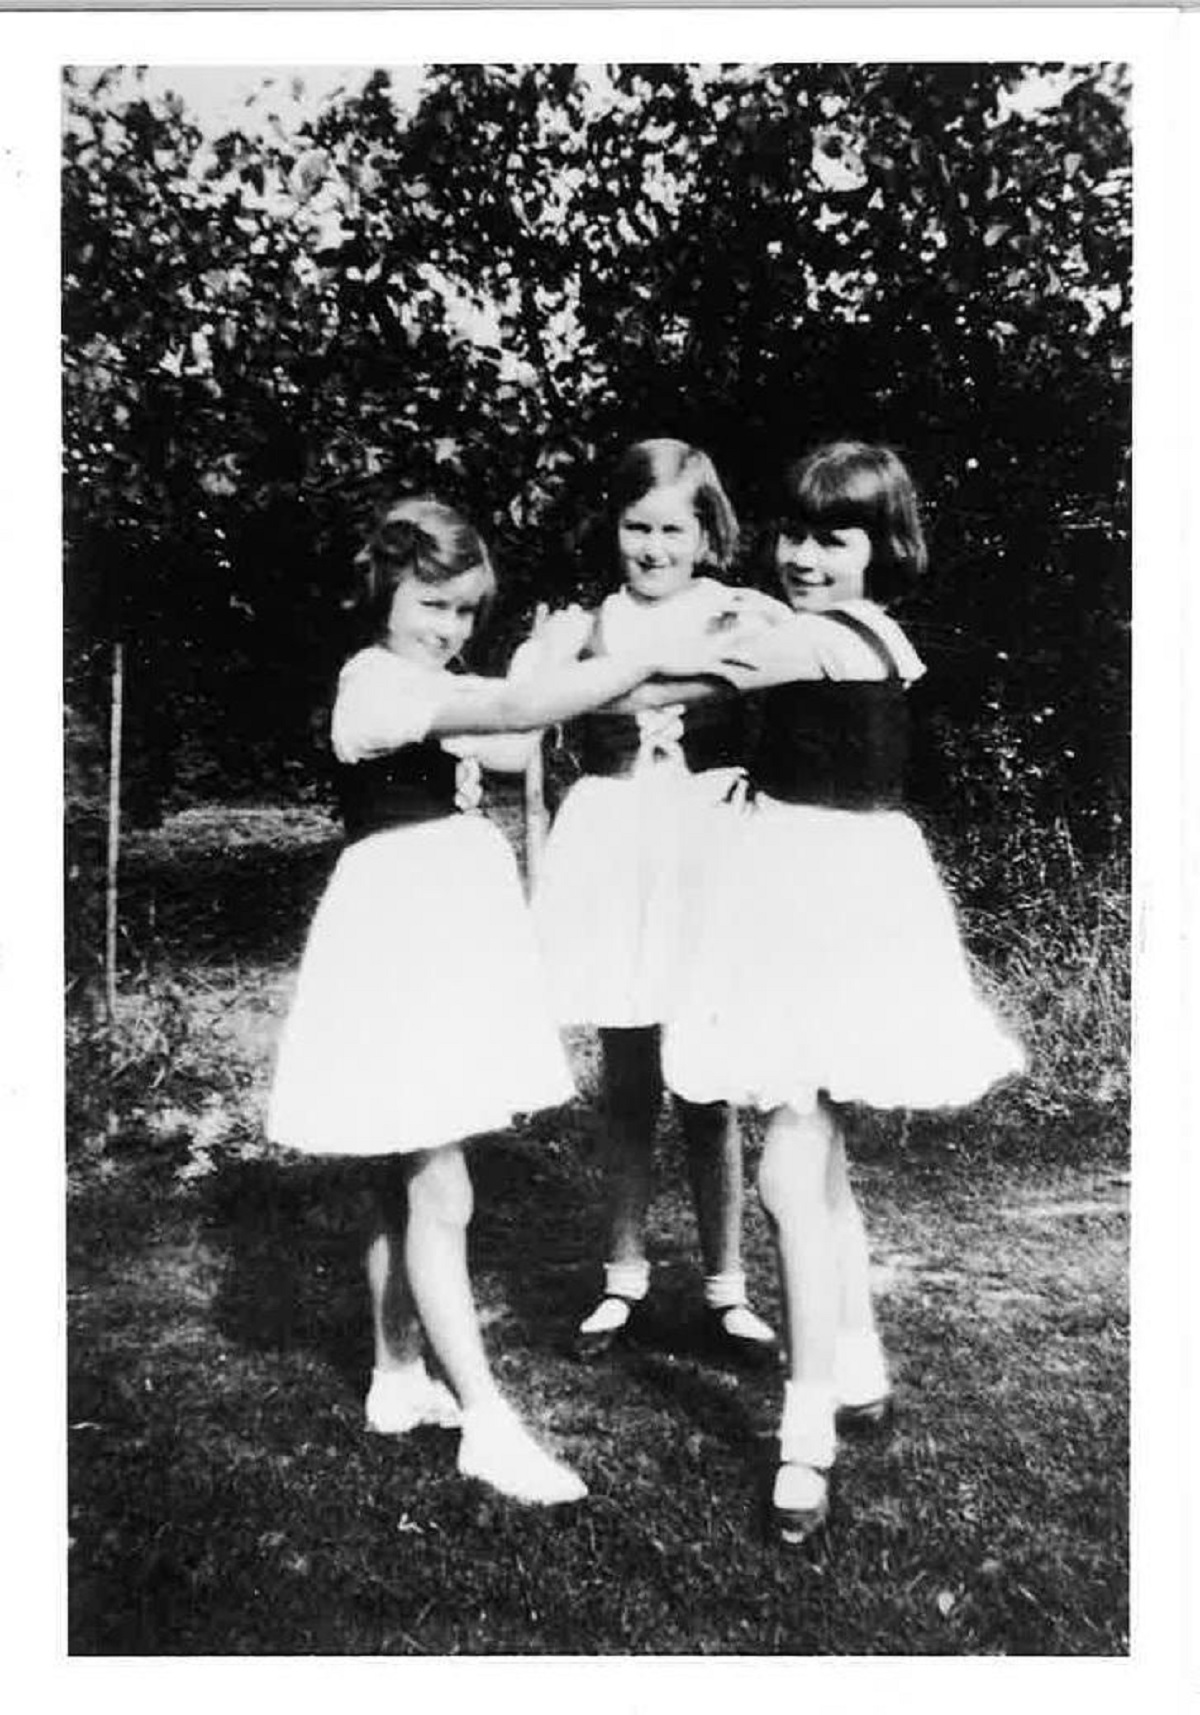 Making a song and dance - these girls look ready to perform. We believe this picture was taken in either the 1920s or 1930s at Mile End School